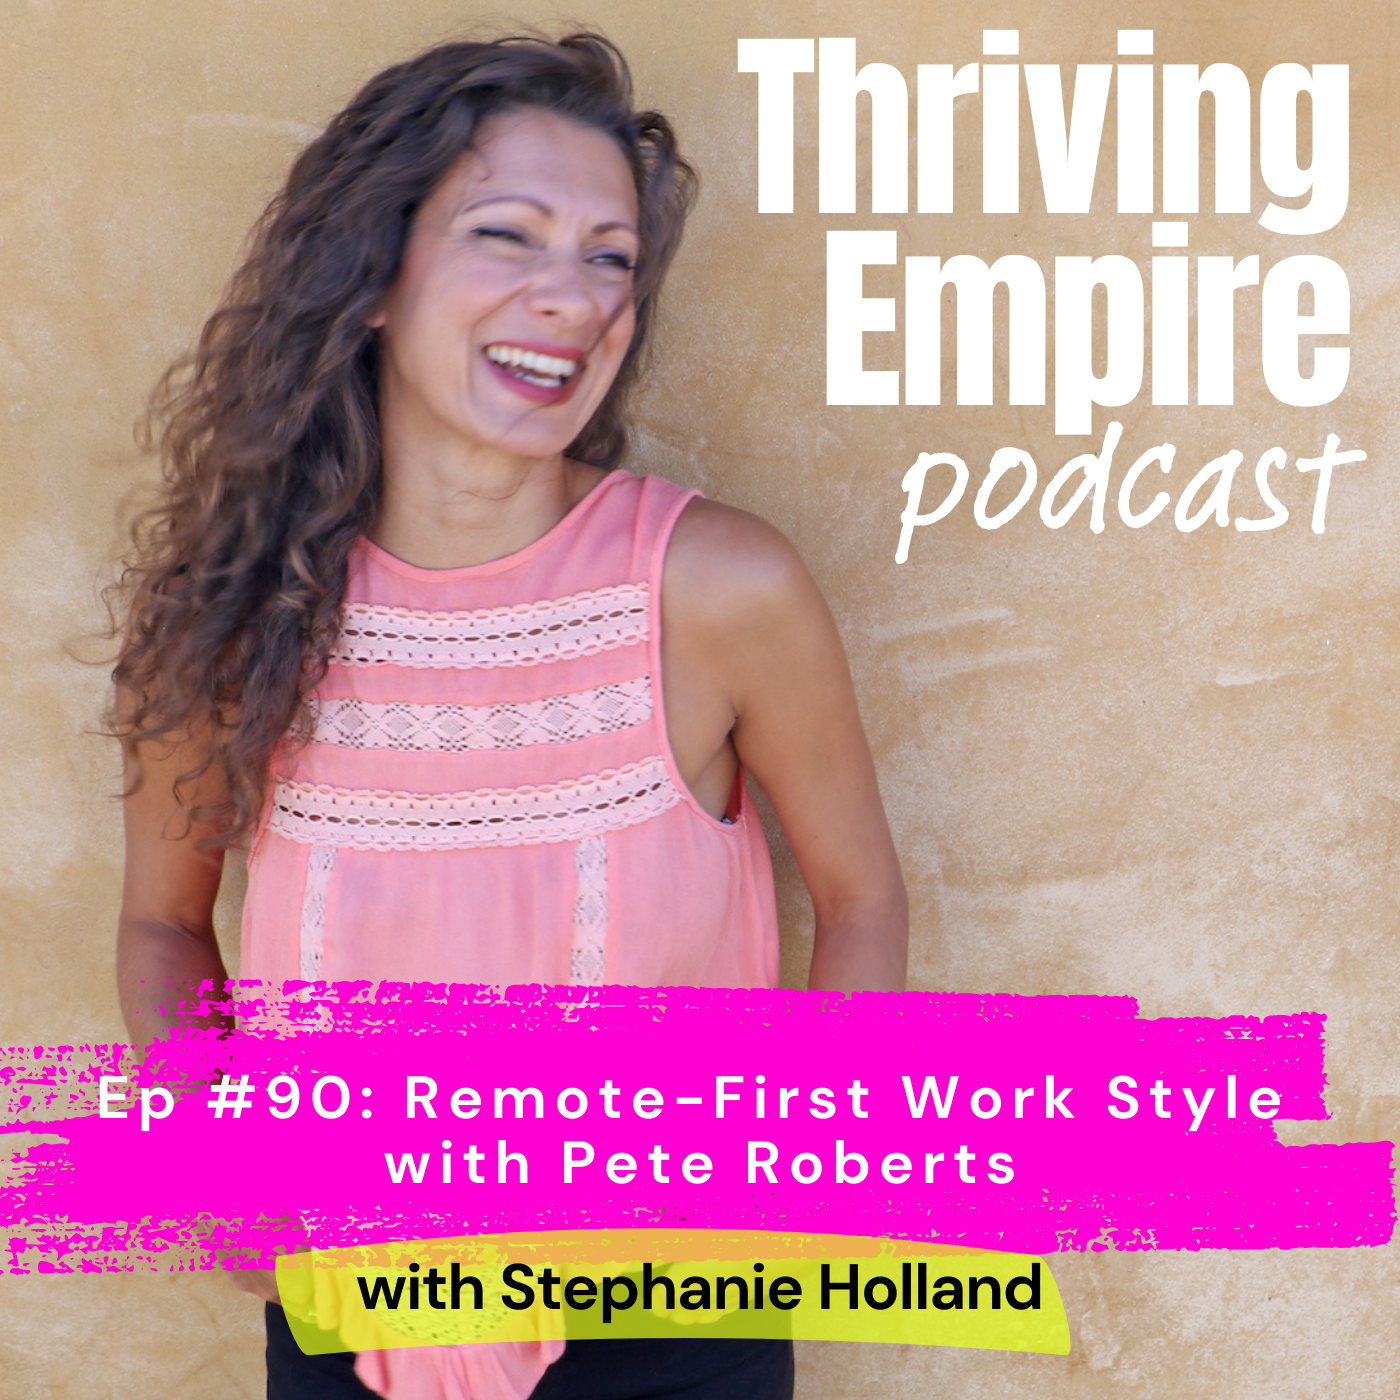 Ep #90: Remote-First Work Style with Pete Roberts